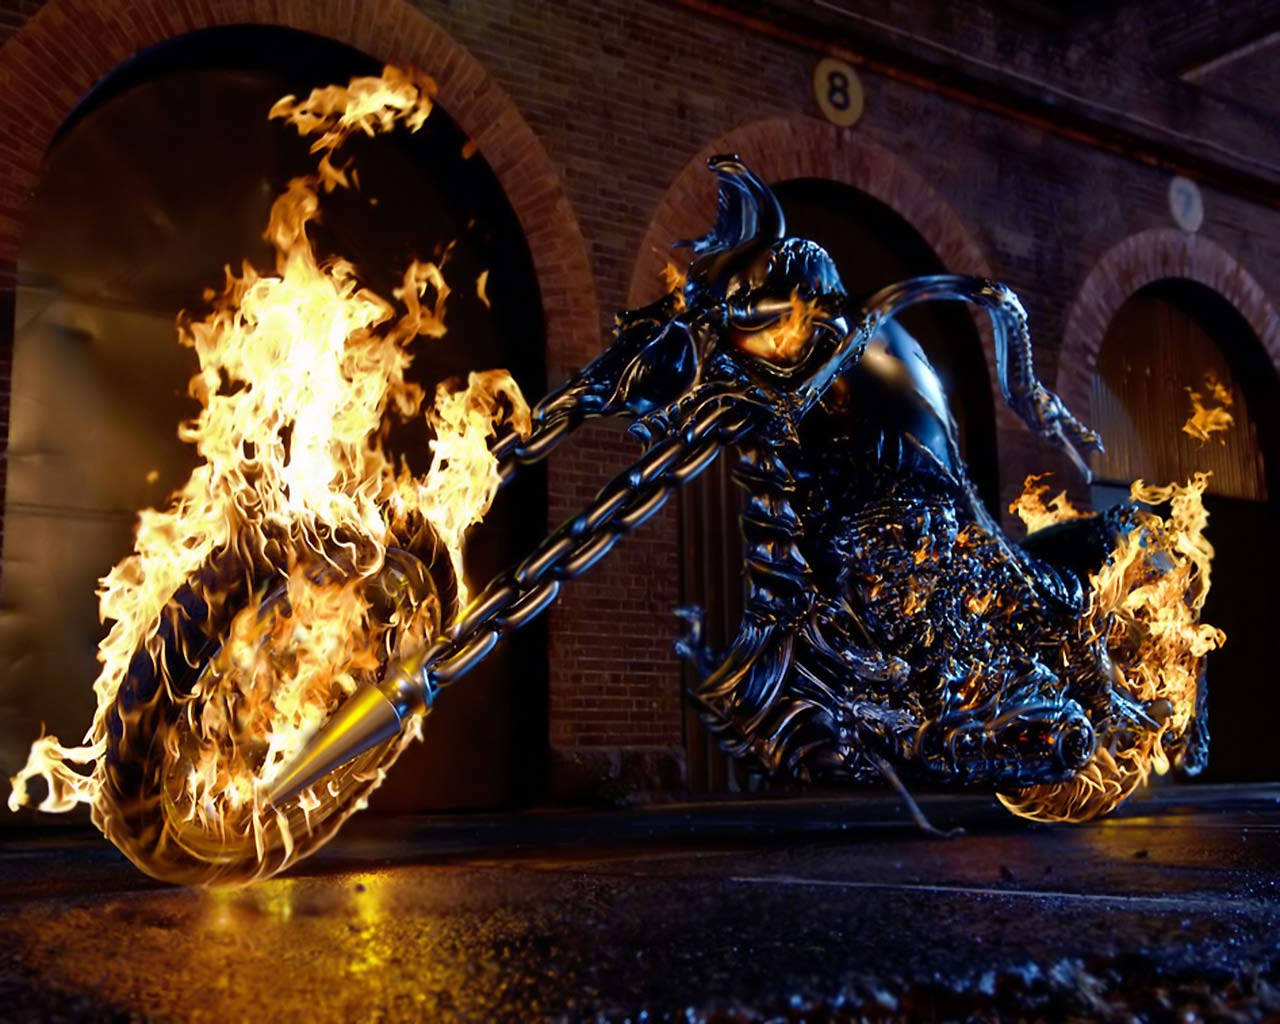 Cool 3d Ghost Rider's Motor